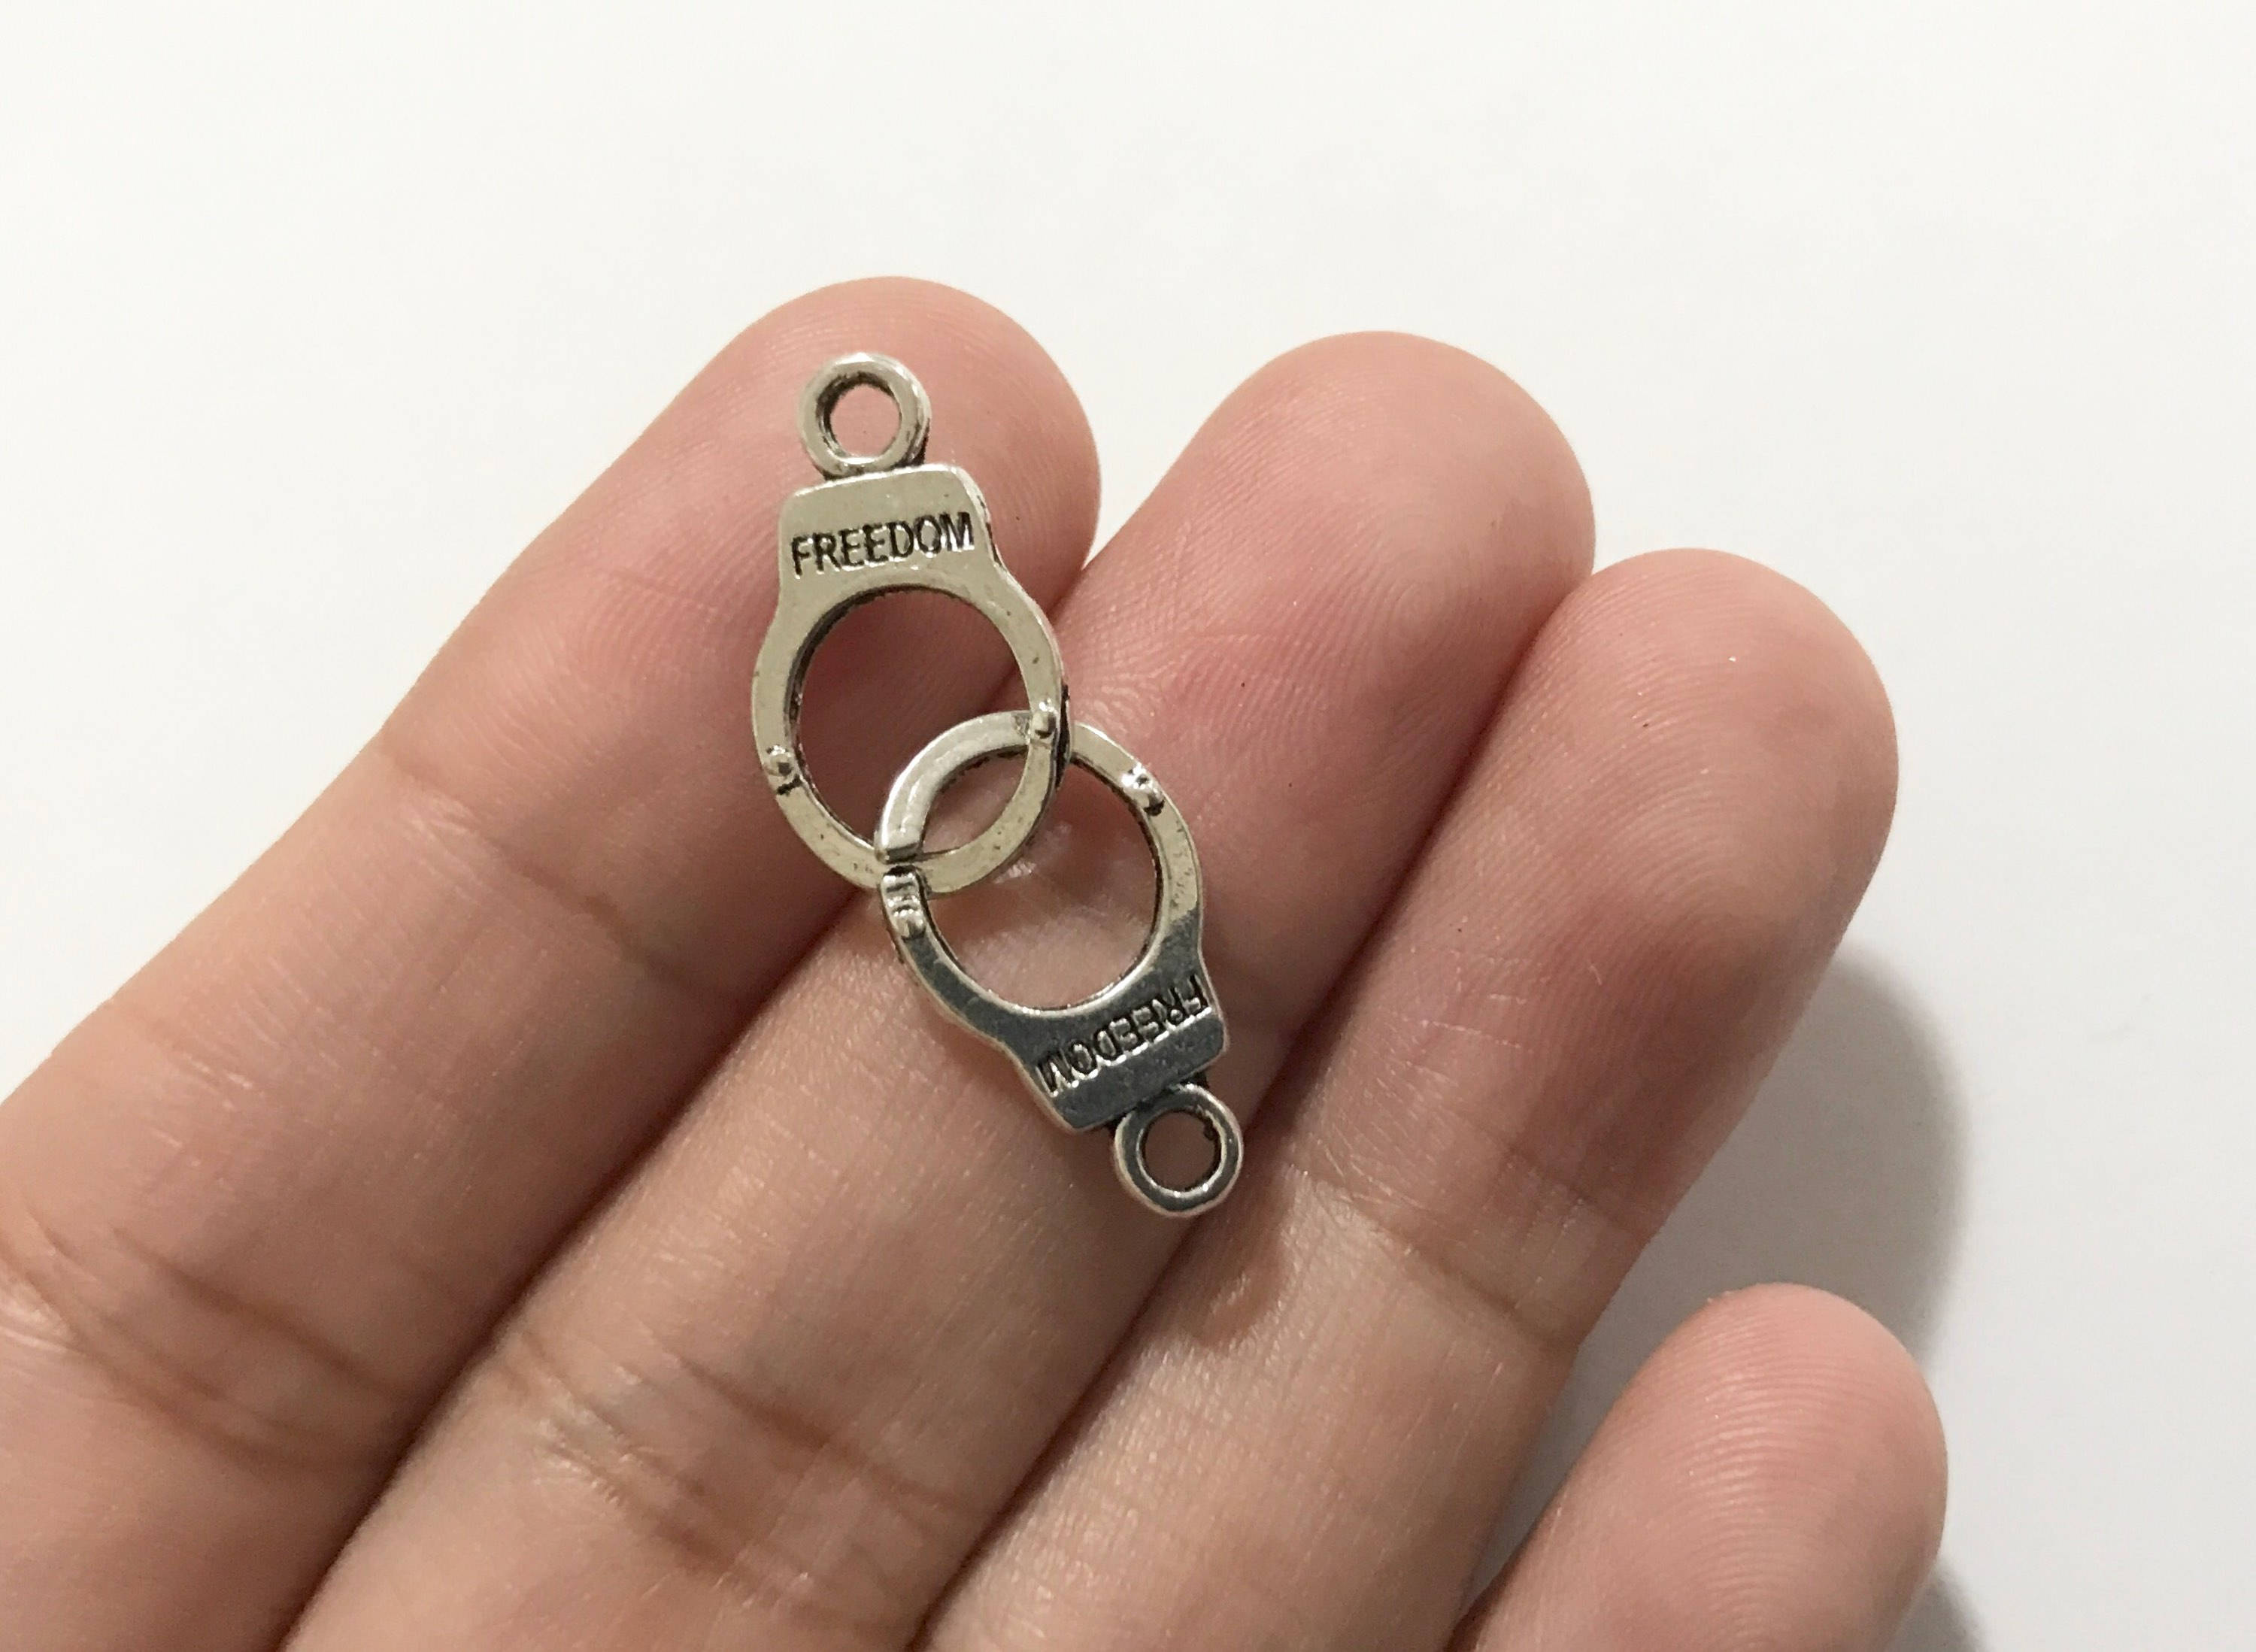 5 Pcs Freedom Handcuff Charm In Antique Silver